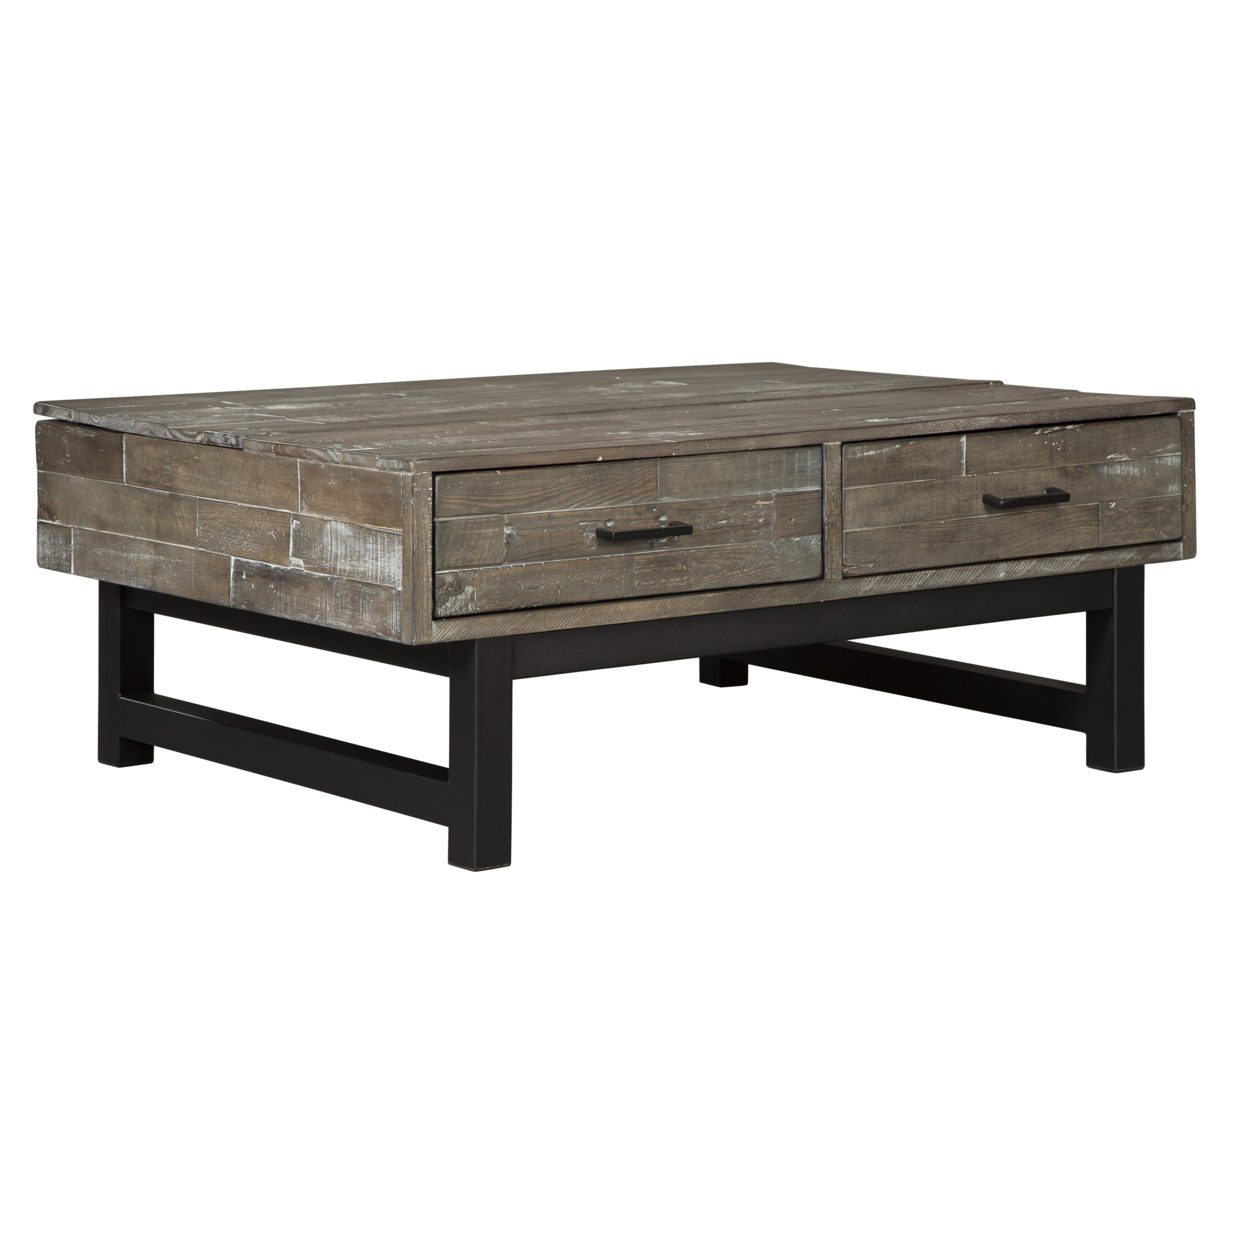 2 Drawer Wooden Lift Top Cocktail Table With Block Legs, Brown And Black- Saltoro Sherpi